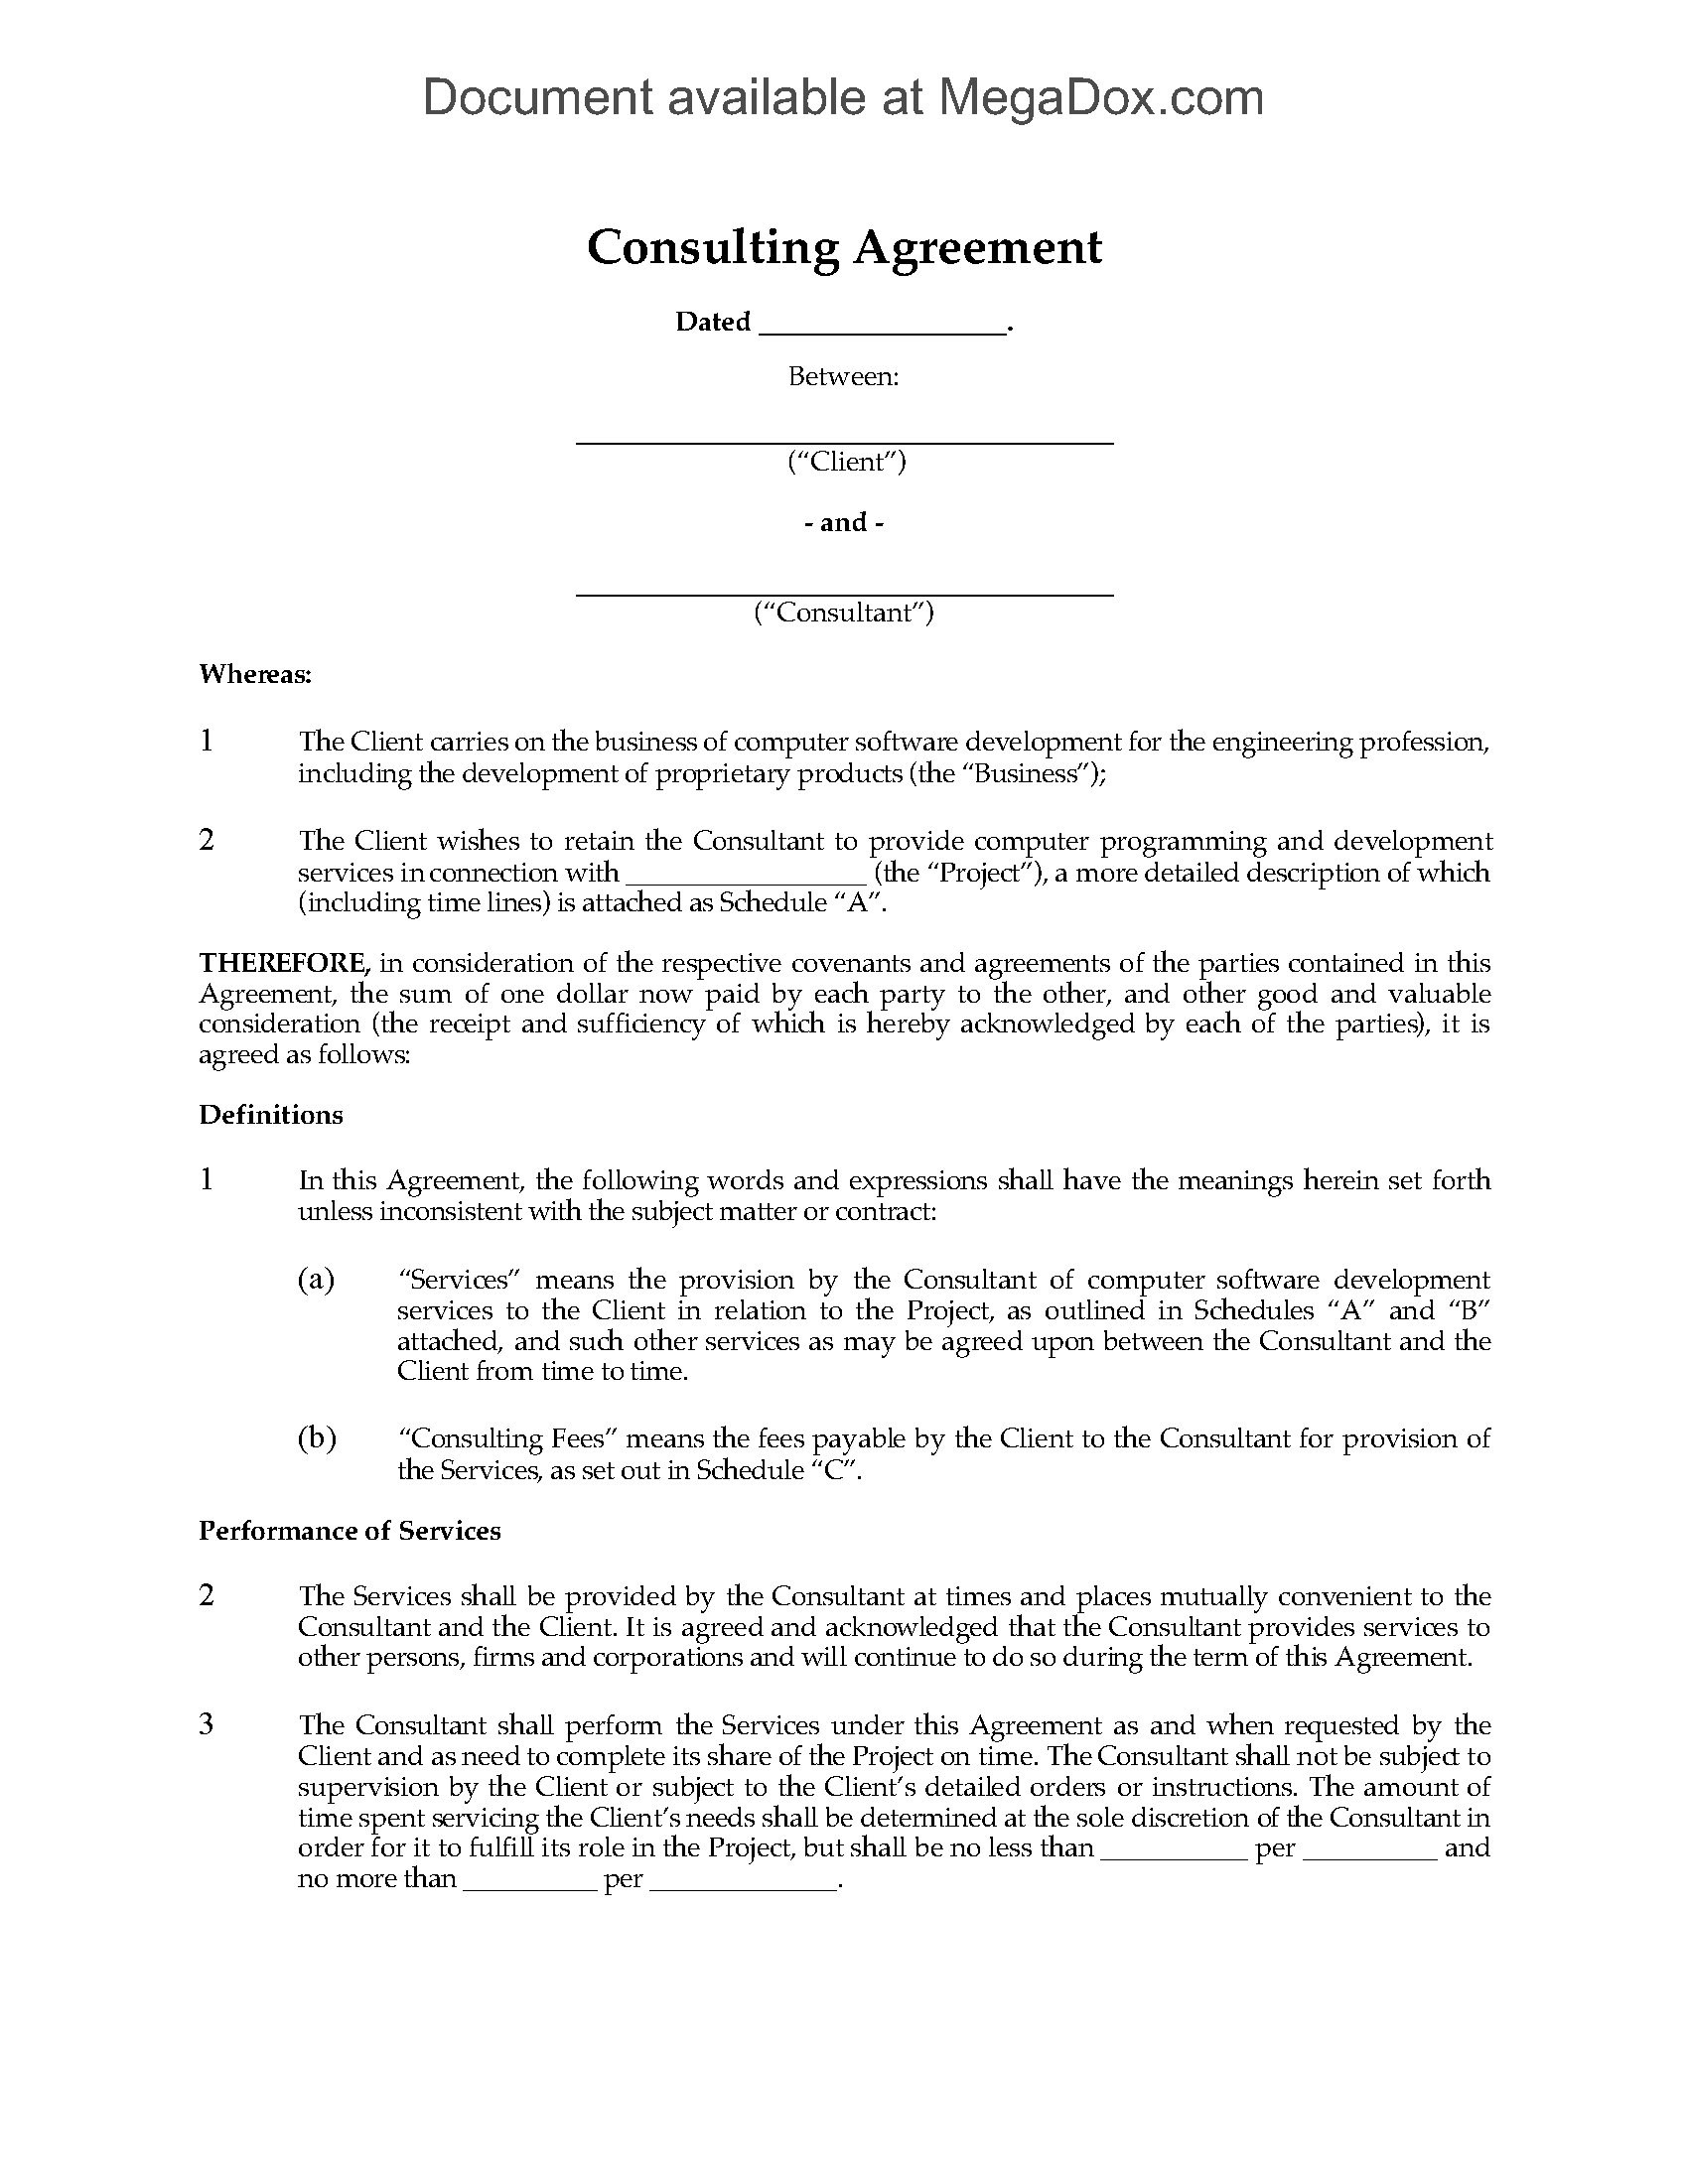 Canada Consulting Agreement For Software Development Legal Forms Document Developer Contract